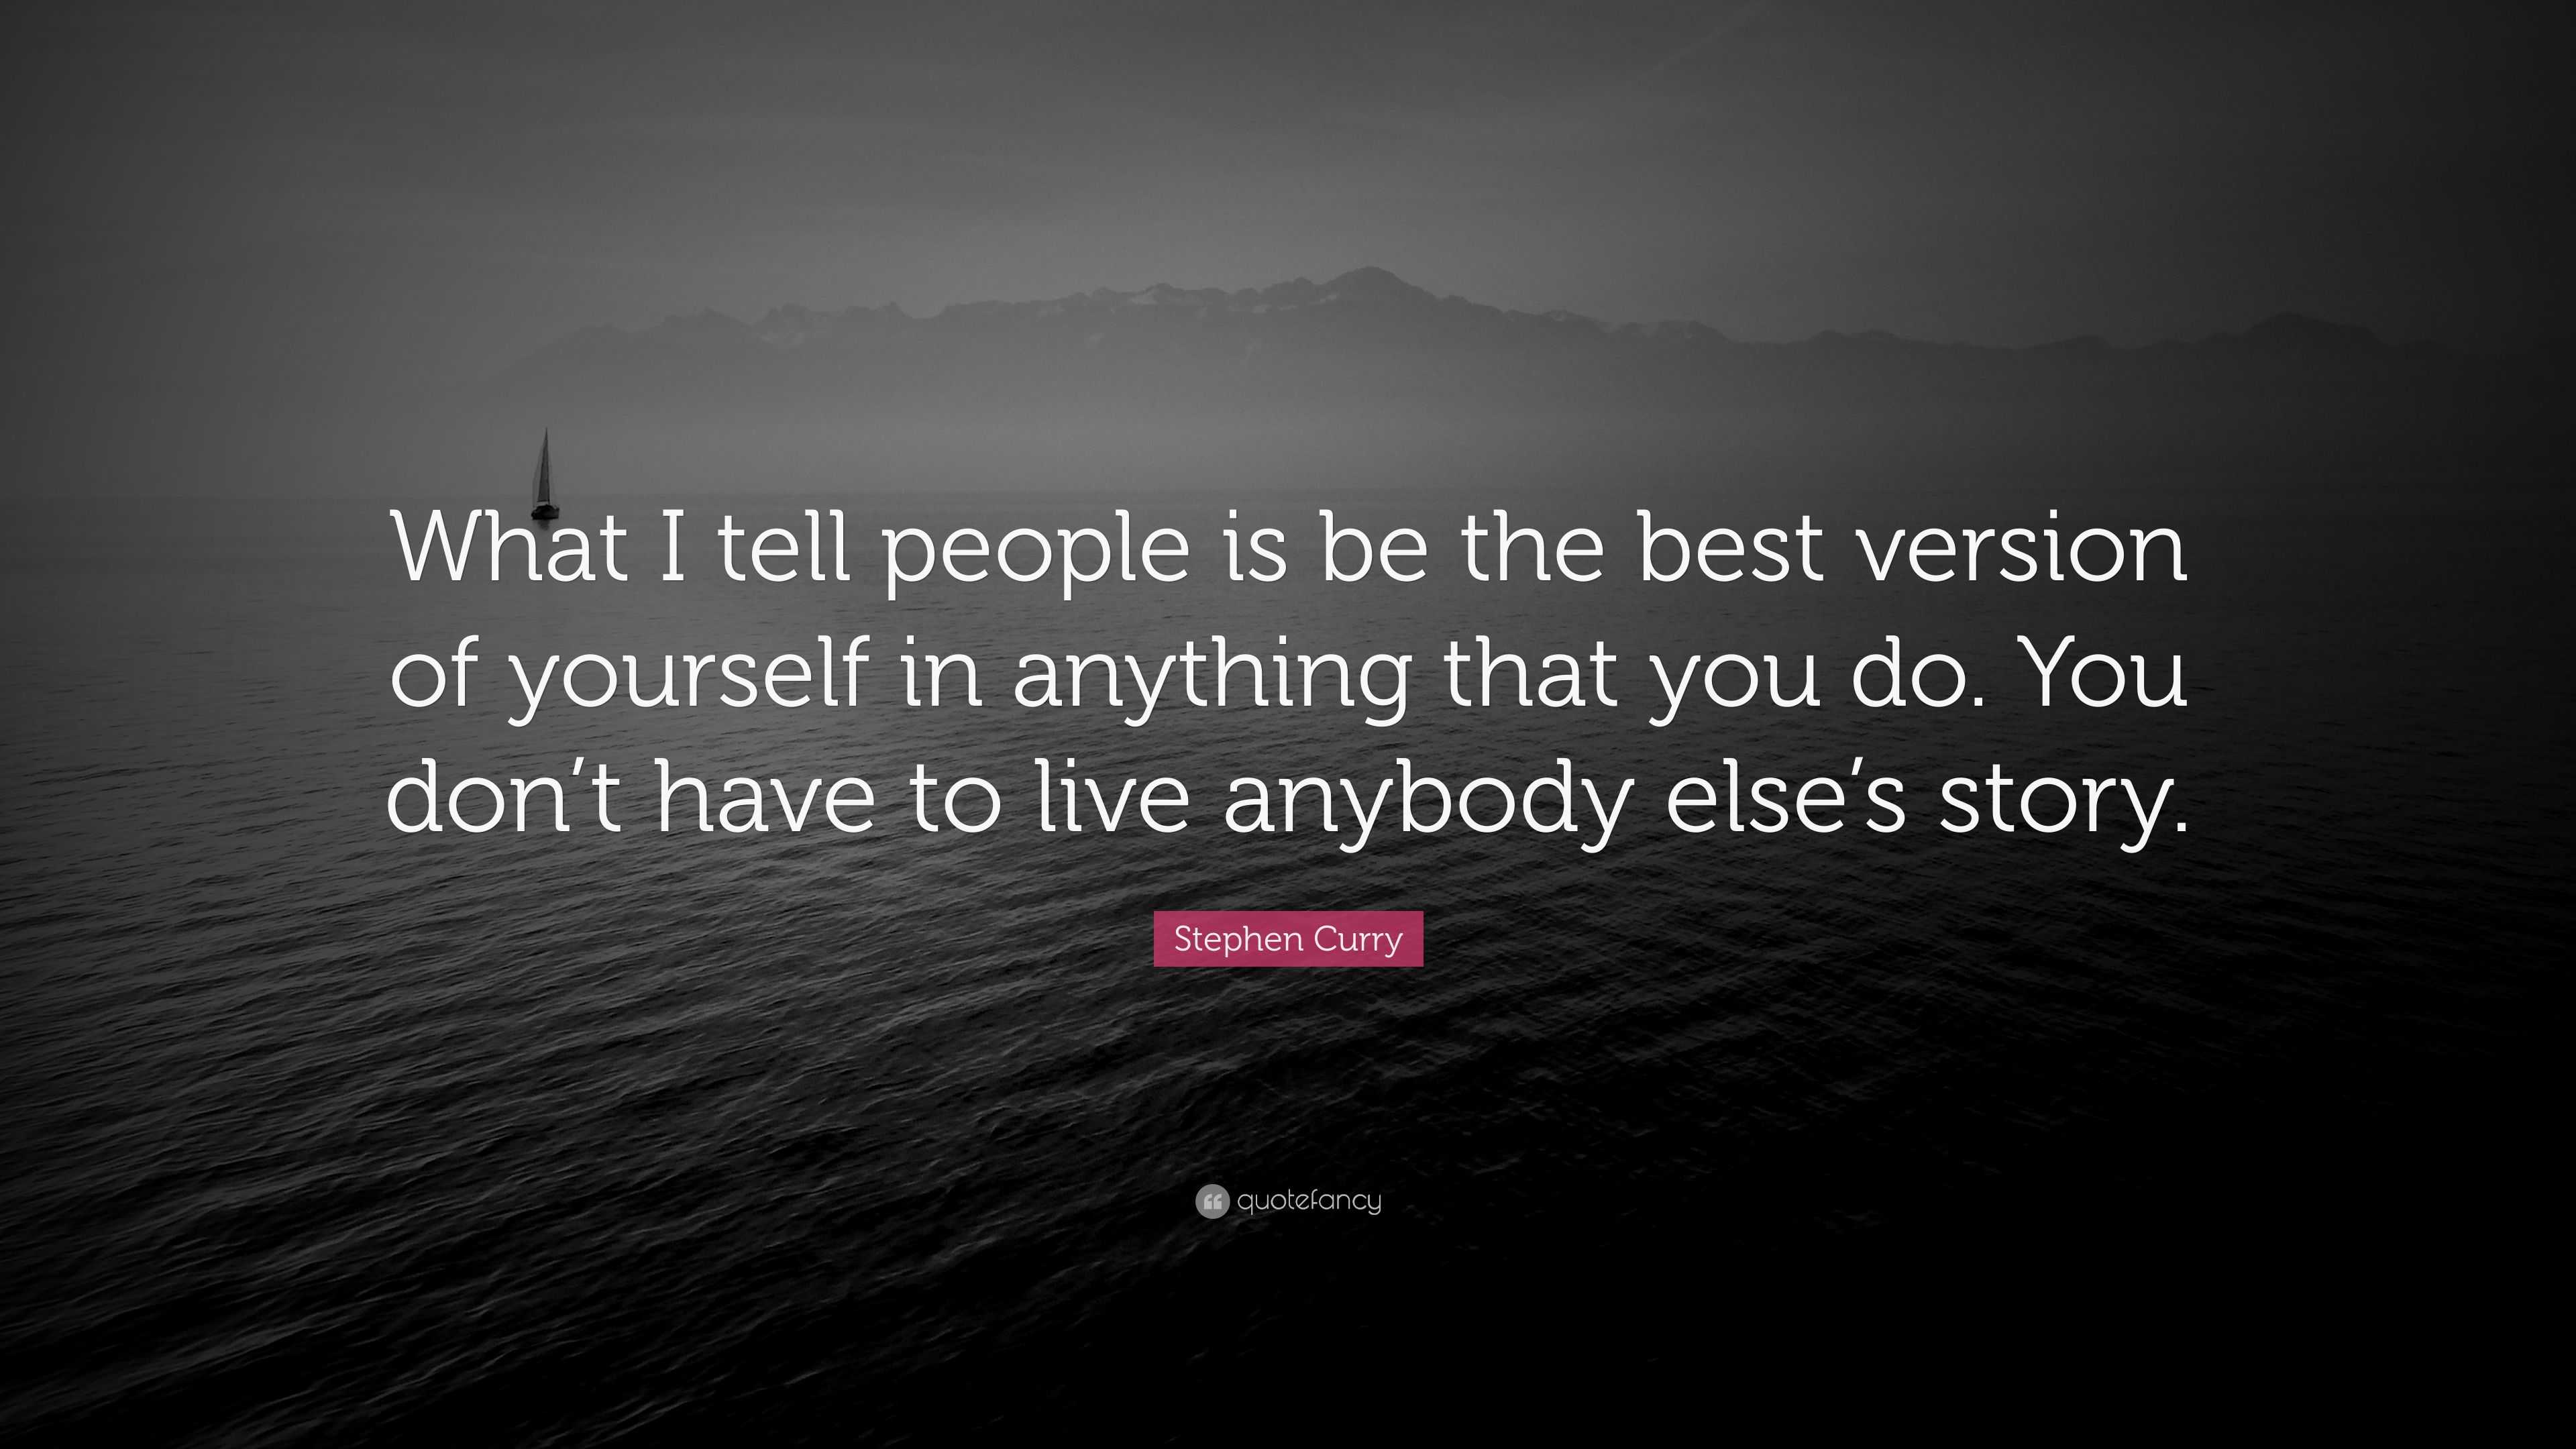 Stephen Curry Quote: “What I tell people is be the best version of ...